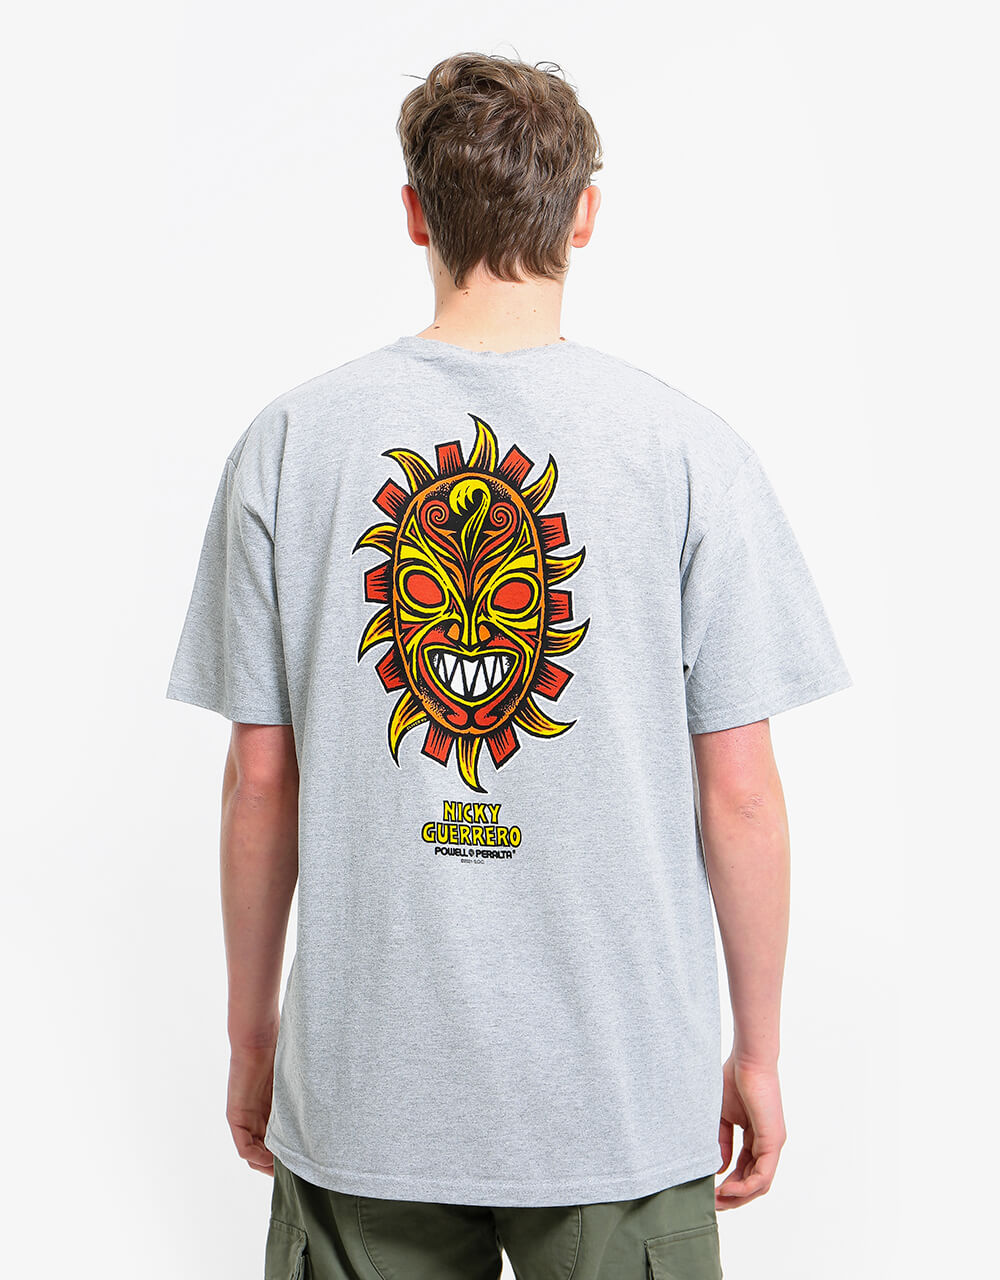 Powell Peralta Nicky Guerrero Mask T-Shirt - Athletic Heather